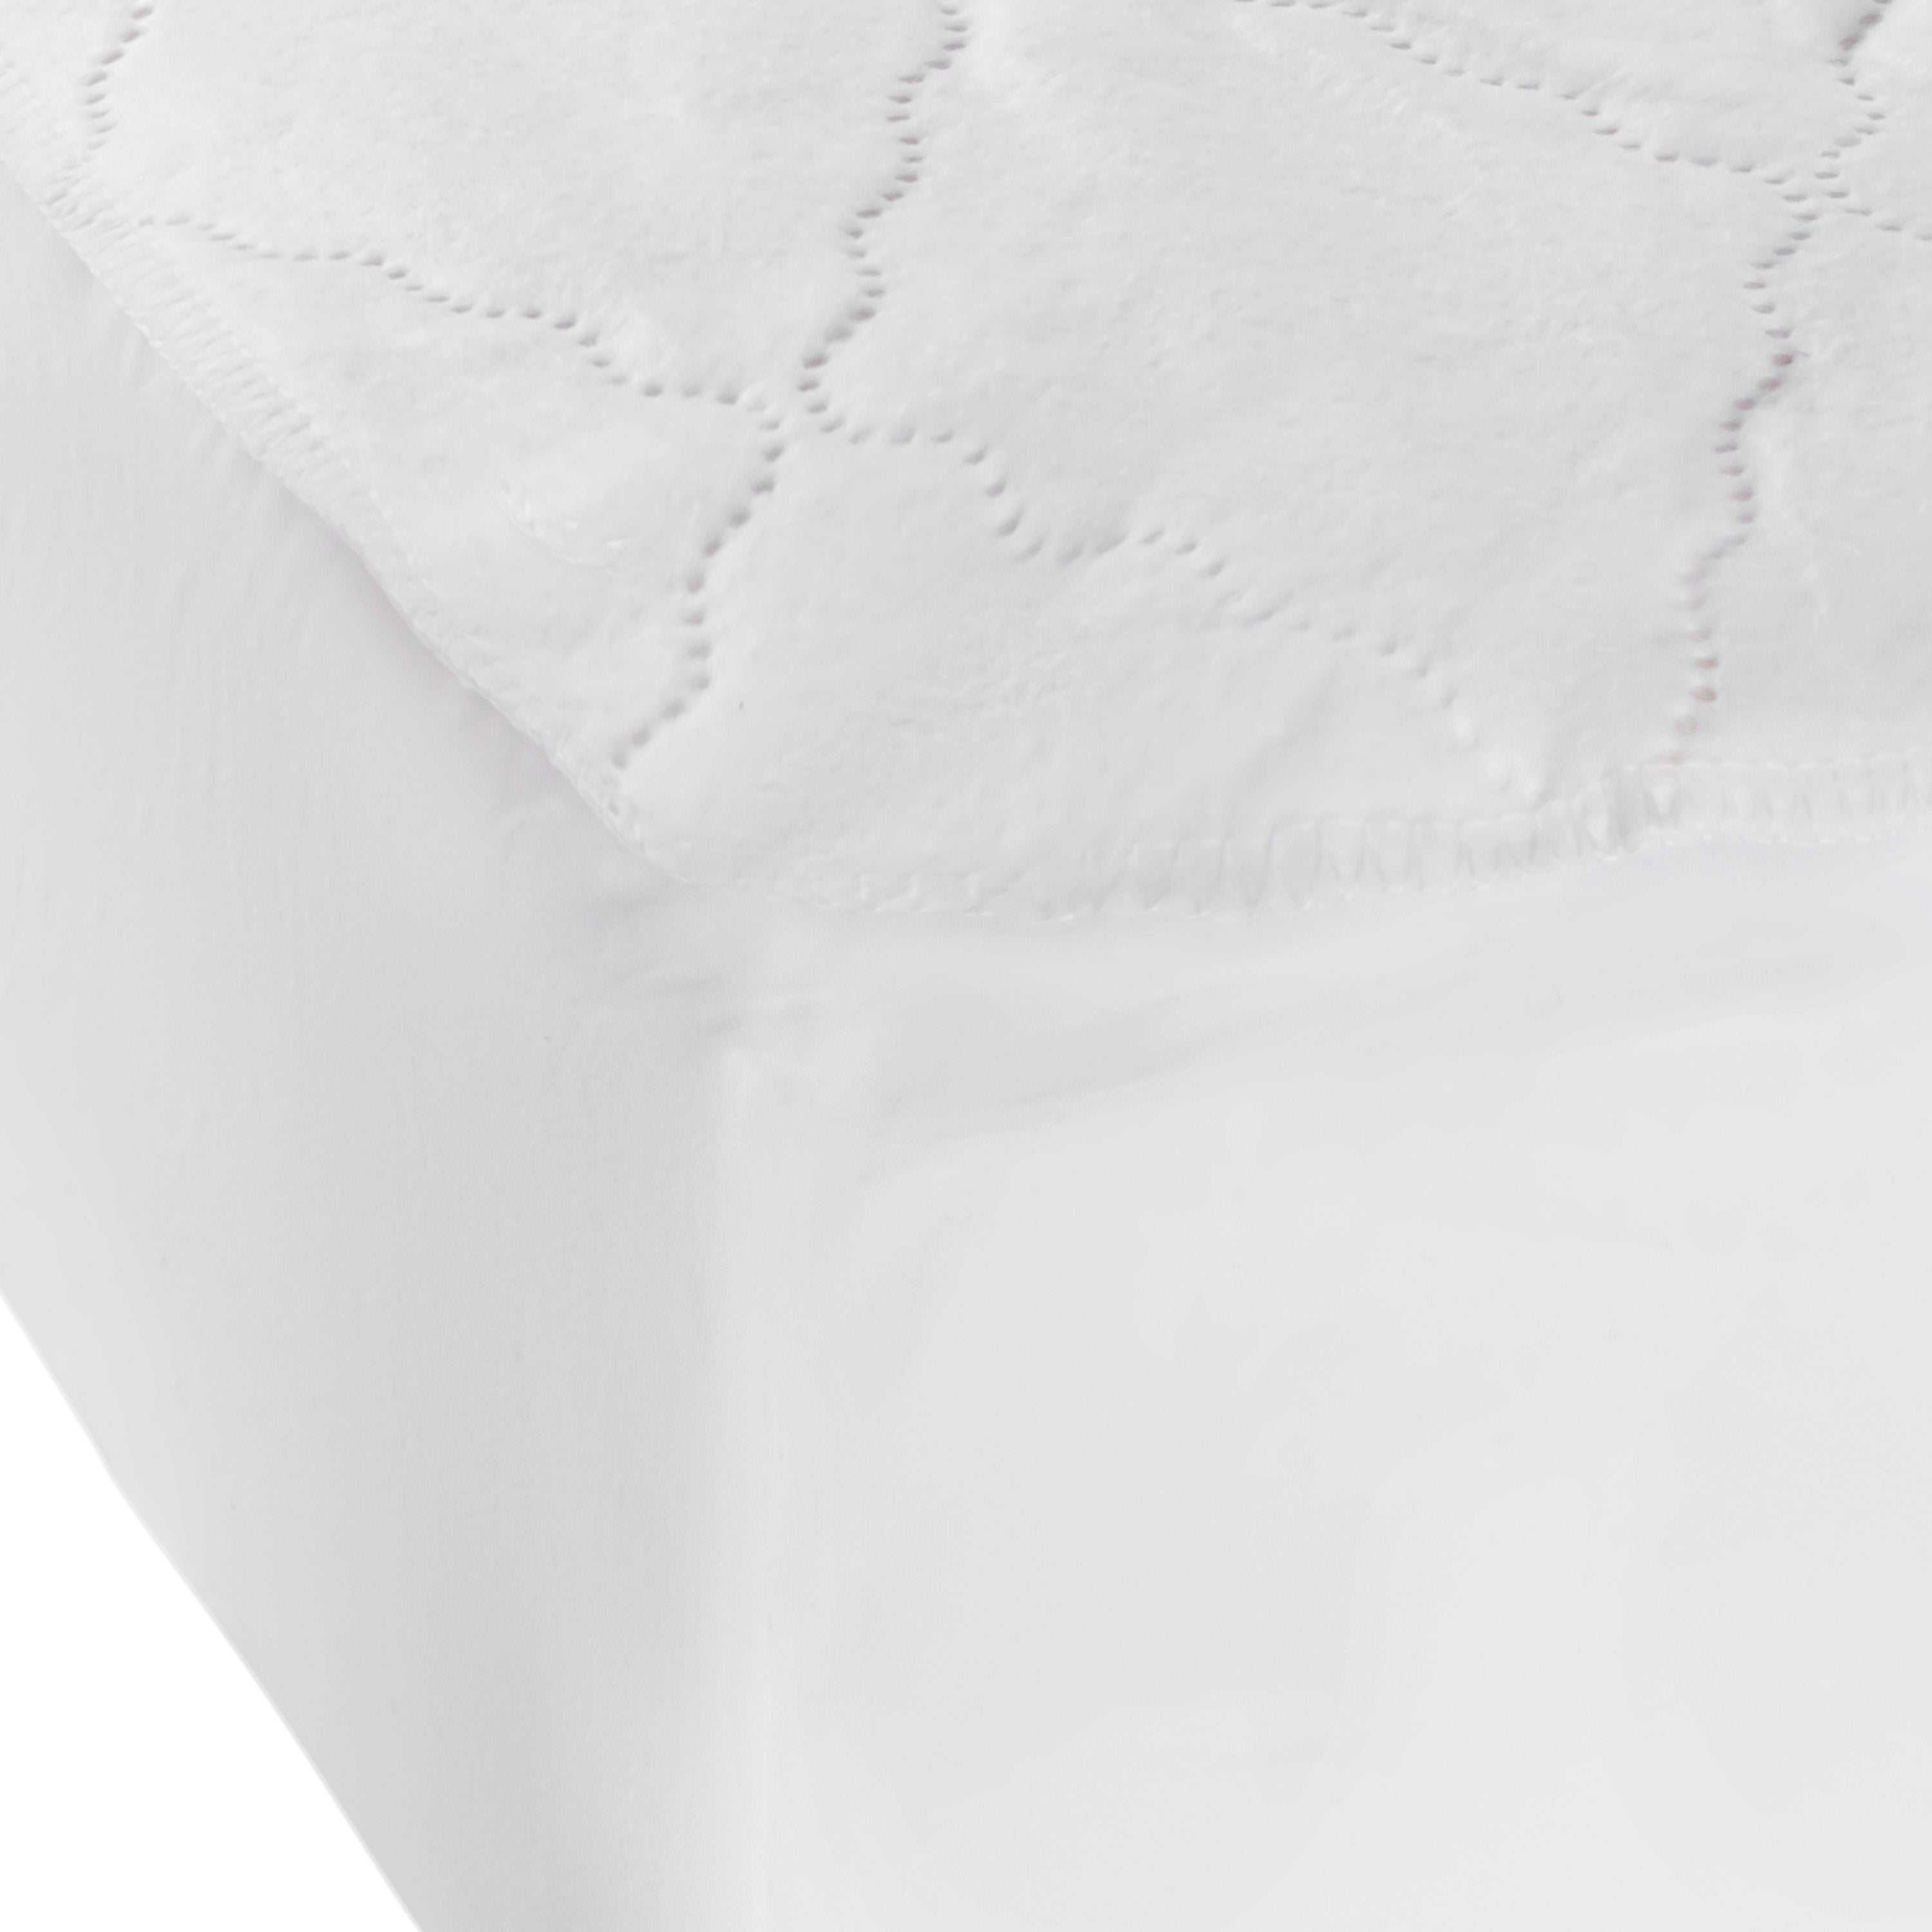 Quilted Waterproof Mattress Pads - Anchor Band and Fitted Style Available Waterproof Mattress Pad Bargoose Home Textiles, Inc. 